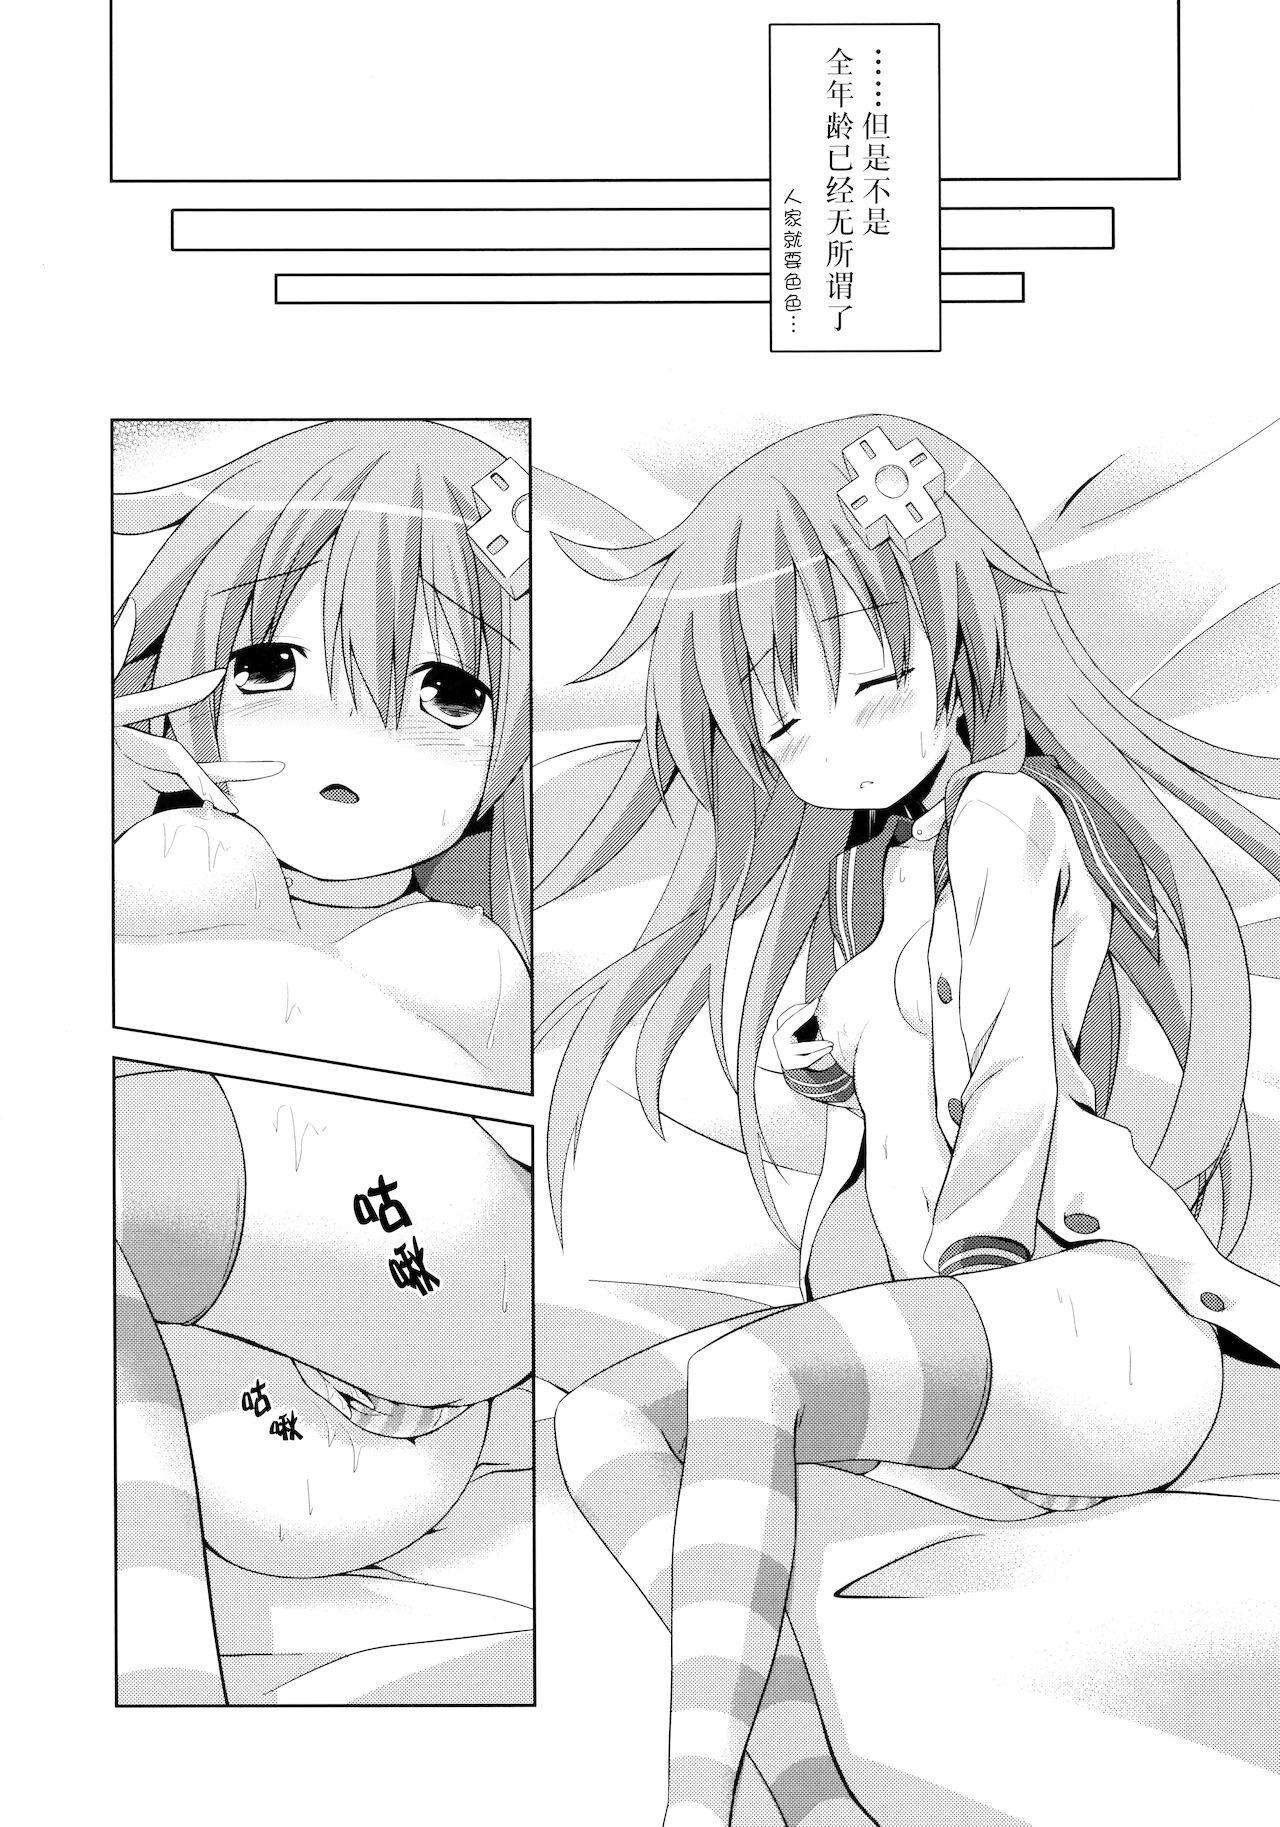 A certain Nepgear was harmed in the making of this doujinshi 7